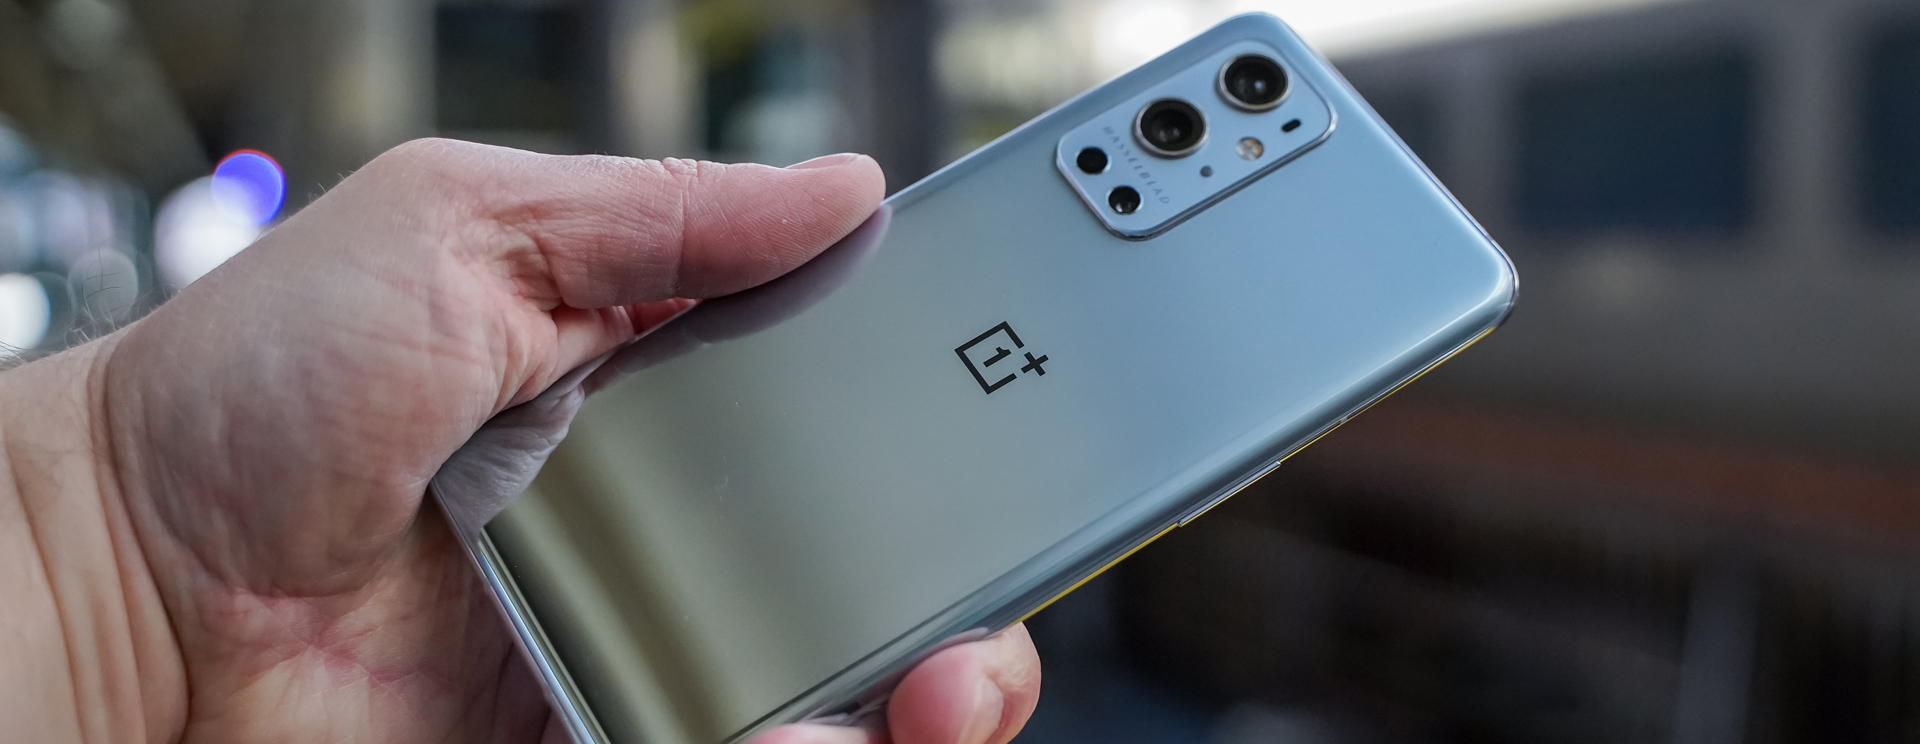 Rip and convert Blu-ray to OnePlus 9 Pro video format